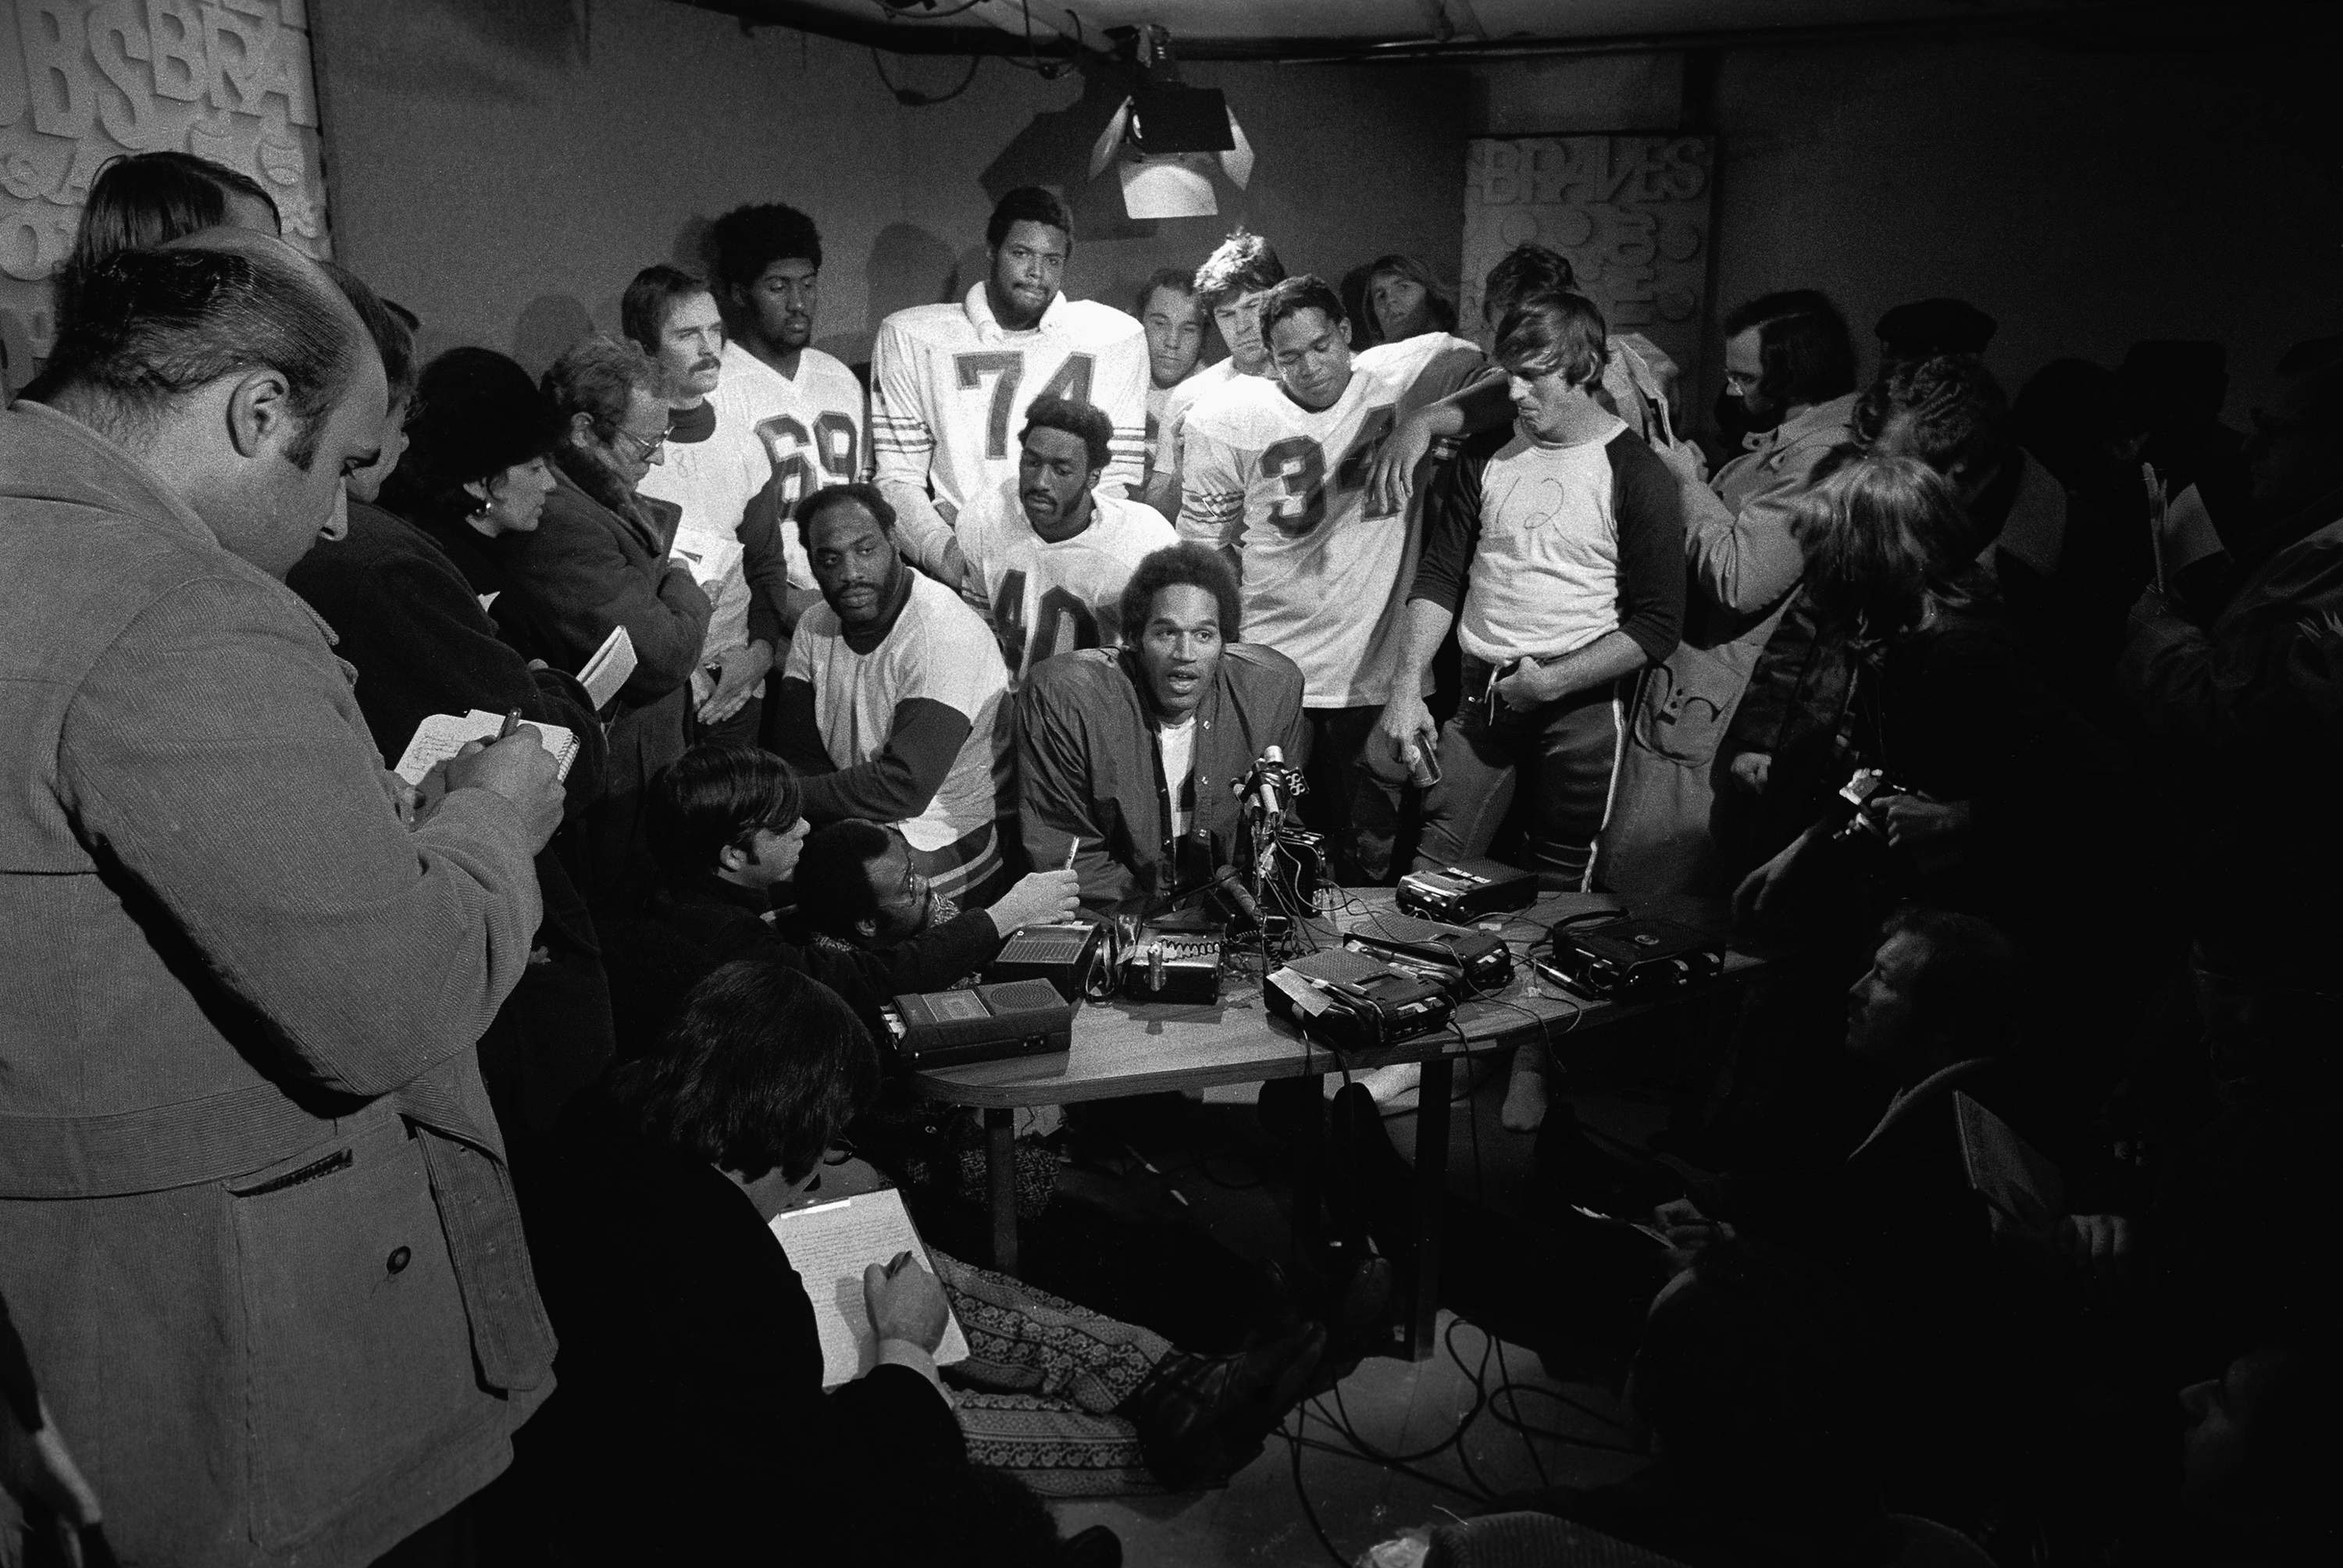 O.J. Simpson speaks to the press with members of the Buffalo Bills gathered around following his record-breaking performance in a game in 1973.